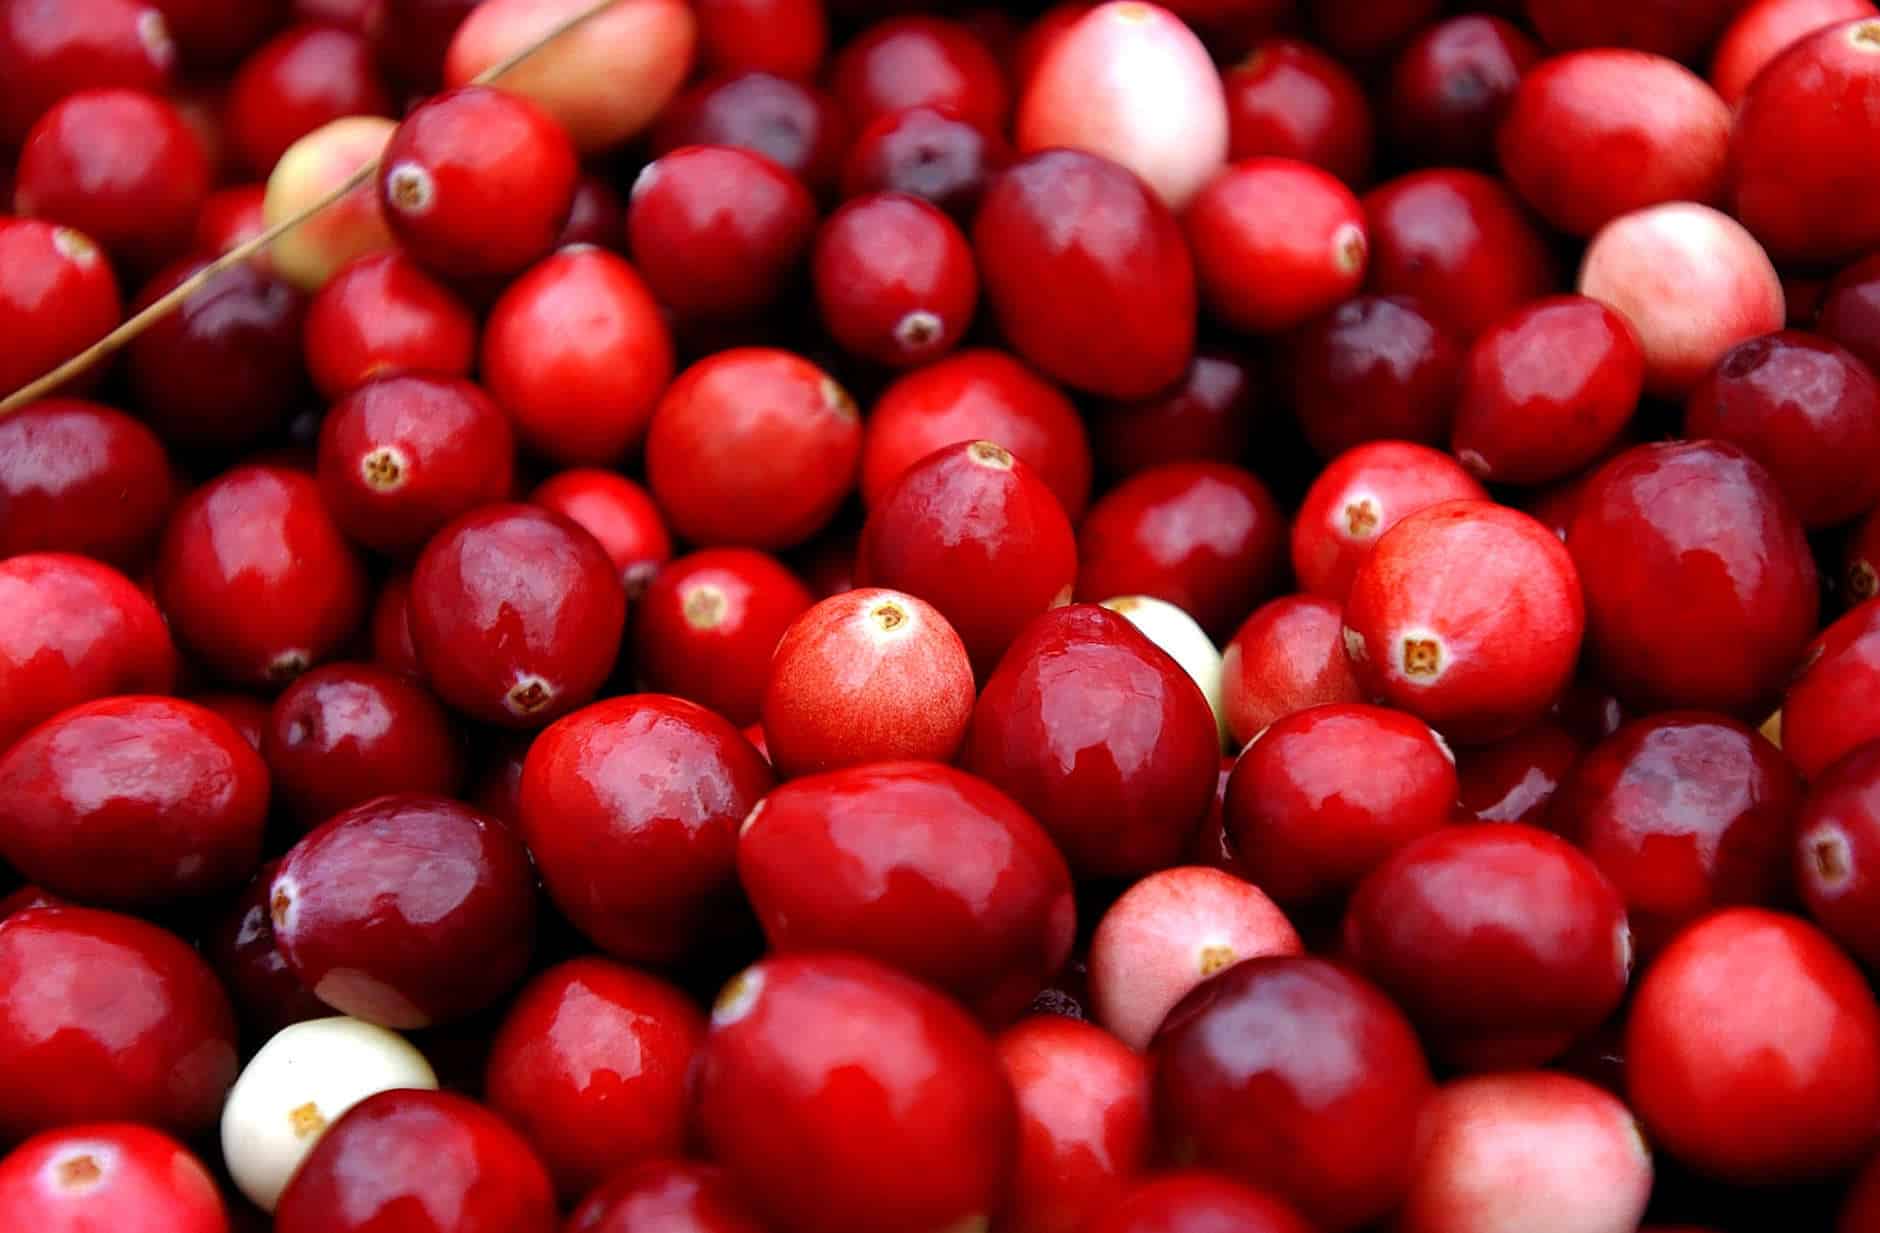 CARVER, MA - OCTOBER 22:  Cranberries are harvested at Weston Cranberry Farm October 22, 2004 in Carver, Massachusetts. Most of the worlds cranberries are harvested on 37 thousand acres in five states, with Massachusetts being the leading producer.   (Photo by Darren McCollester/Getty Images)